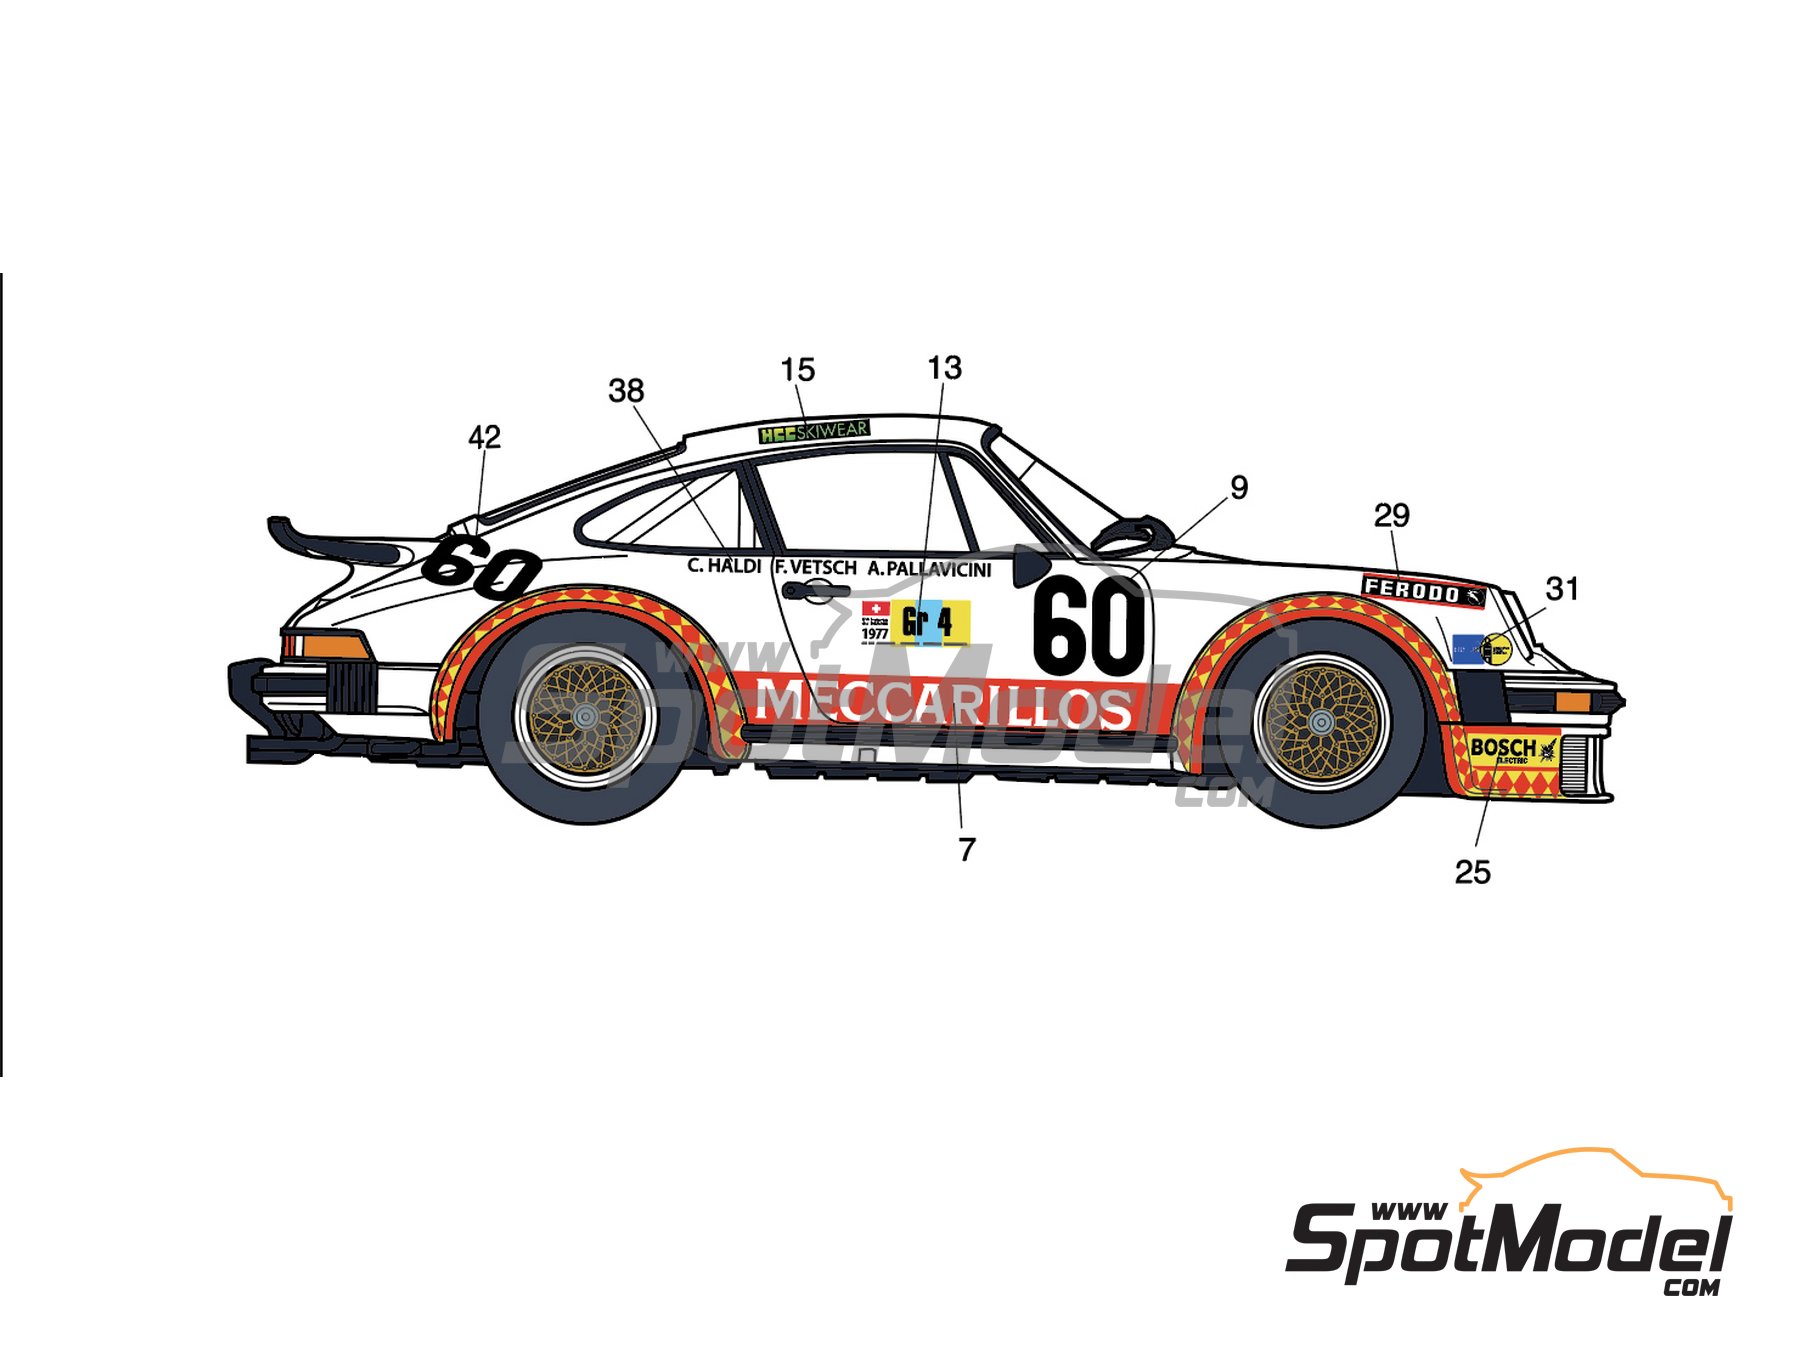 Print Lab Decals Marking Livery 1 24 Scale Porsche 934 Turbo Rsr Group 4 Schiller Racing Team Sponsored By Meccarillos 60 24 Hours Le Mans 1977 Ref Plb2 Spotmodel